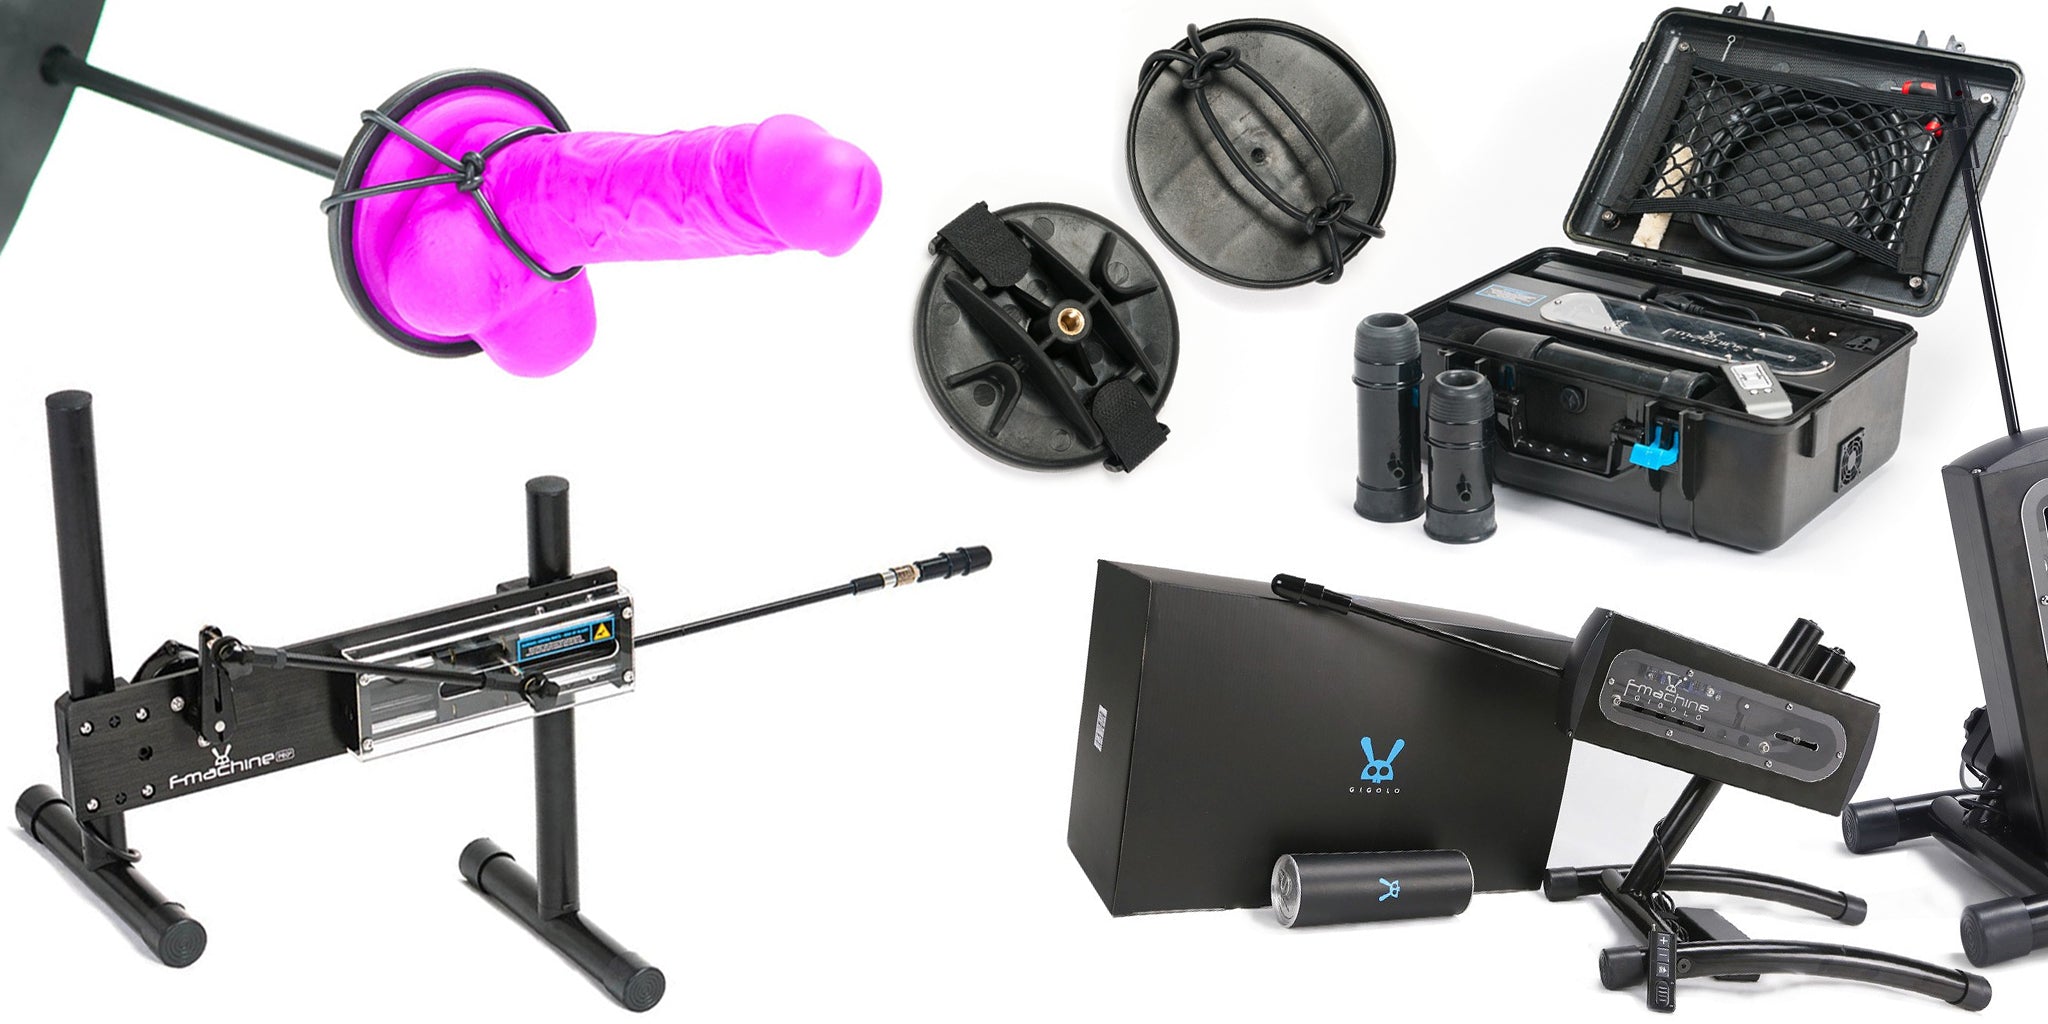 A variety of different sex machines and toys, including various F-machines and a pink dildo, are shown against a blank background.